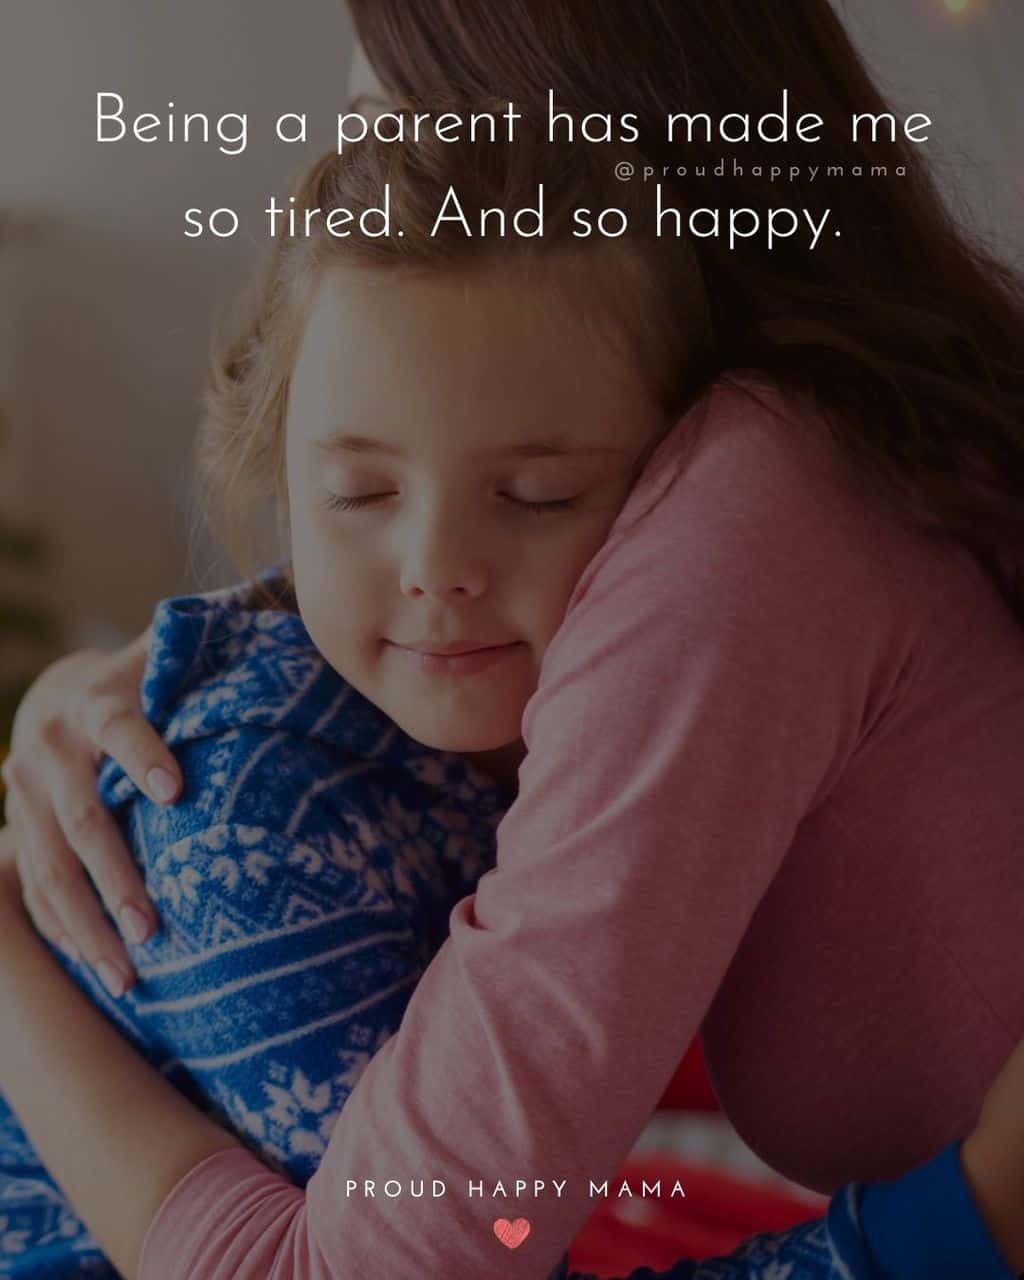 Parenting Quotes - Being a parent has made me so tired. And so happy.’